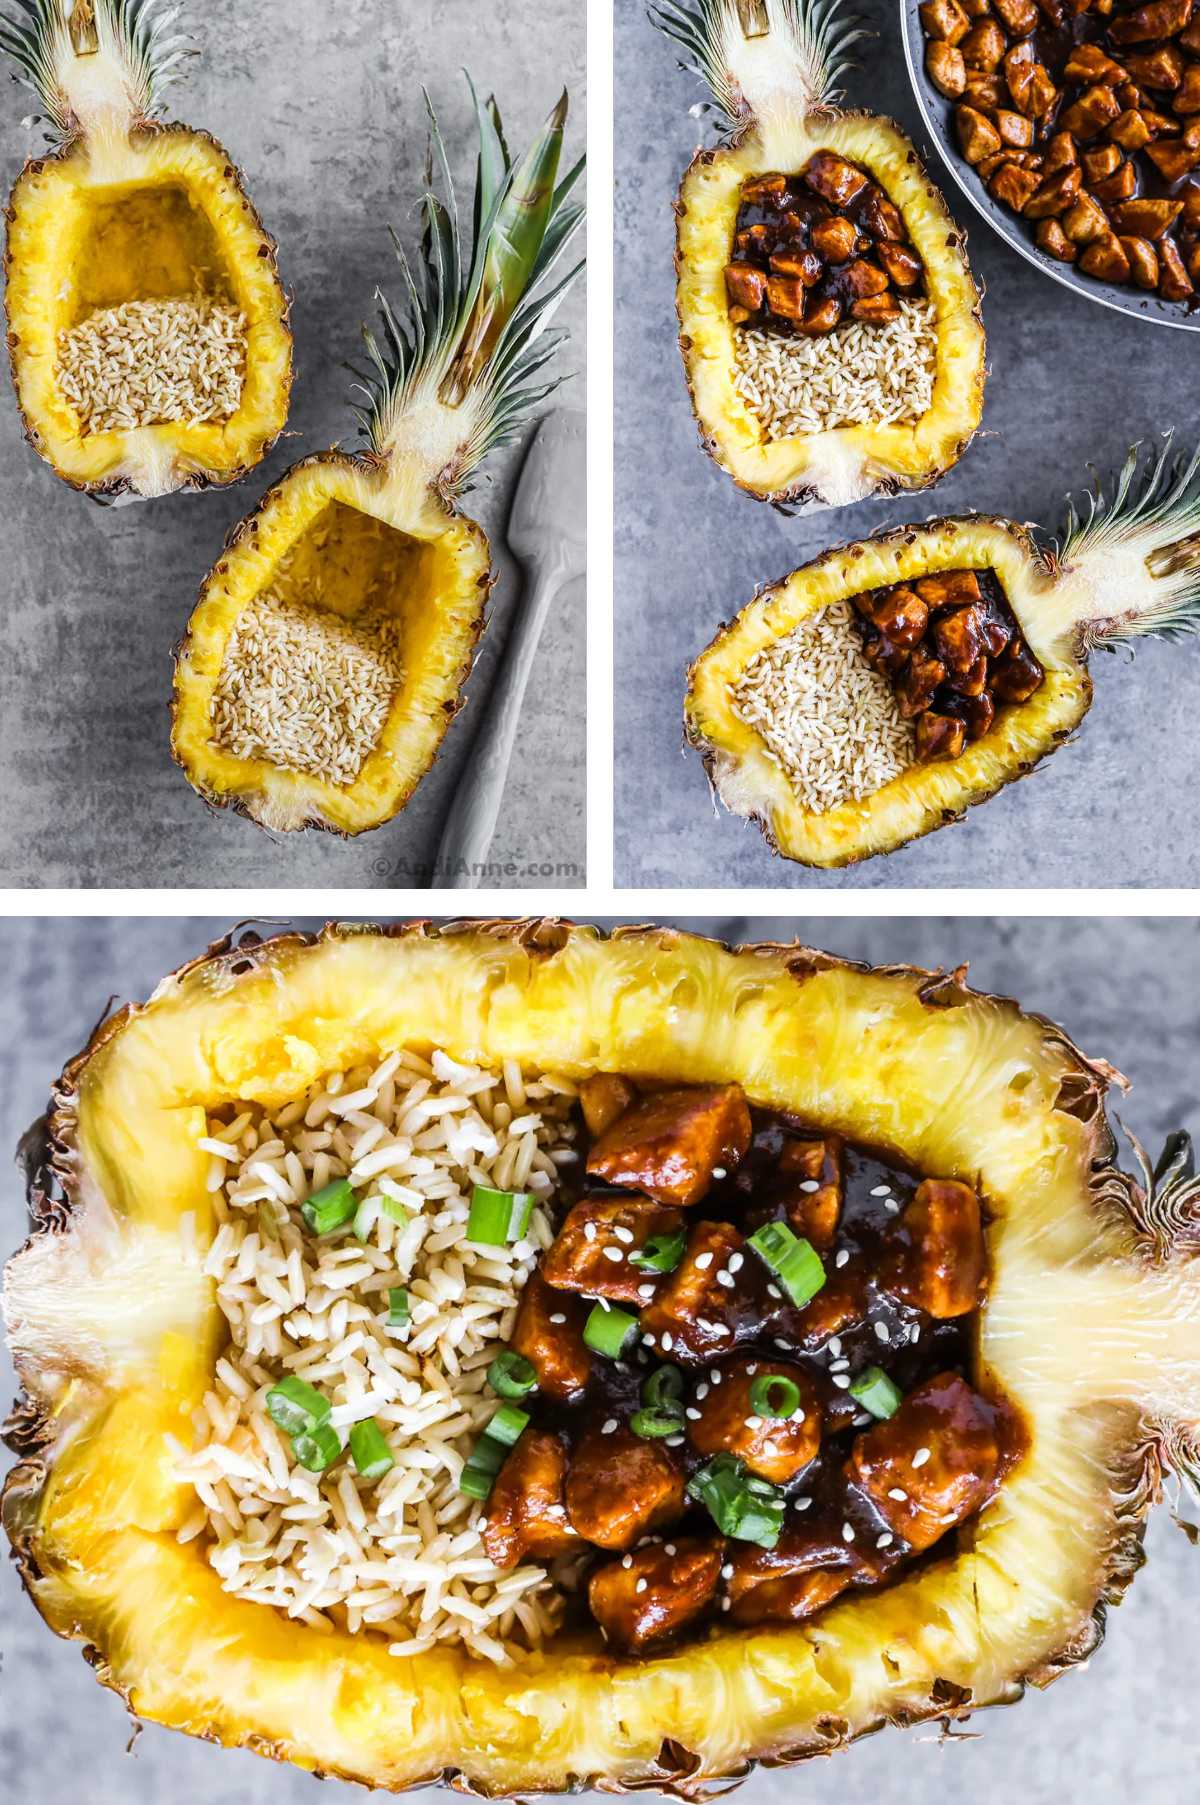 Three images in one. 1. pineapple boats with rice in bottom half. 2. Chicken added above rice. 3. Chicken and rice in pineapple boat with green onion and sesame seeds. 